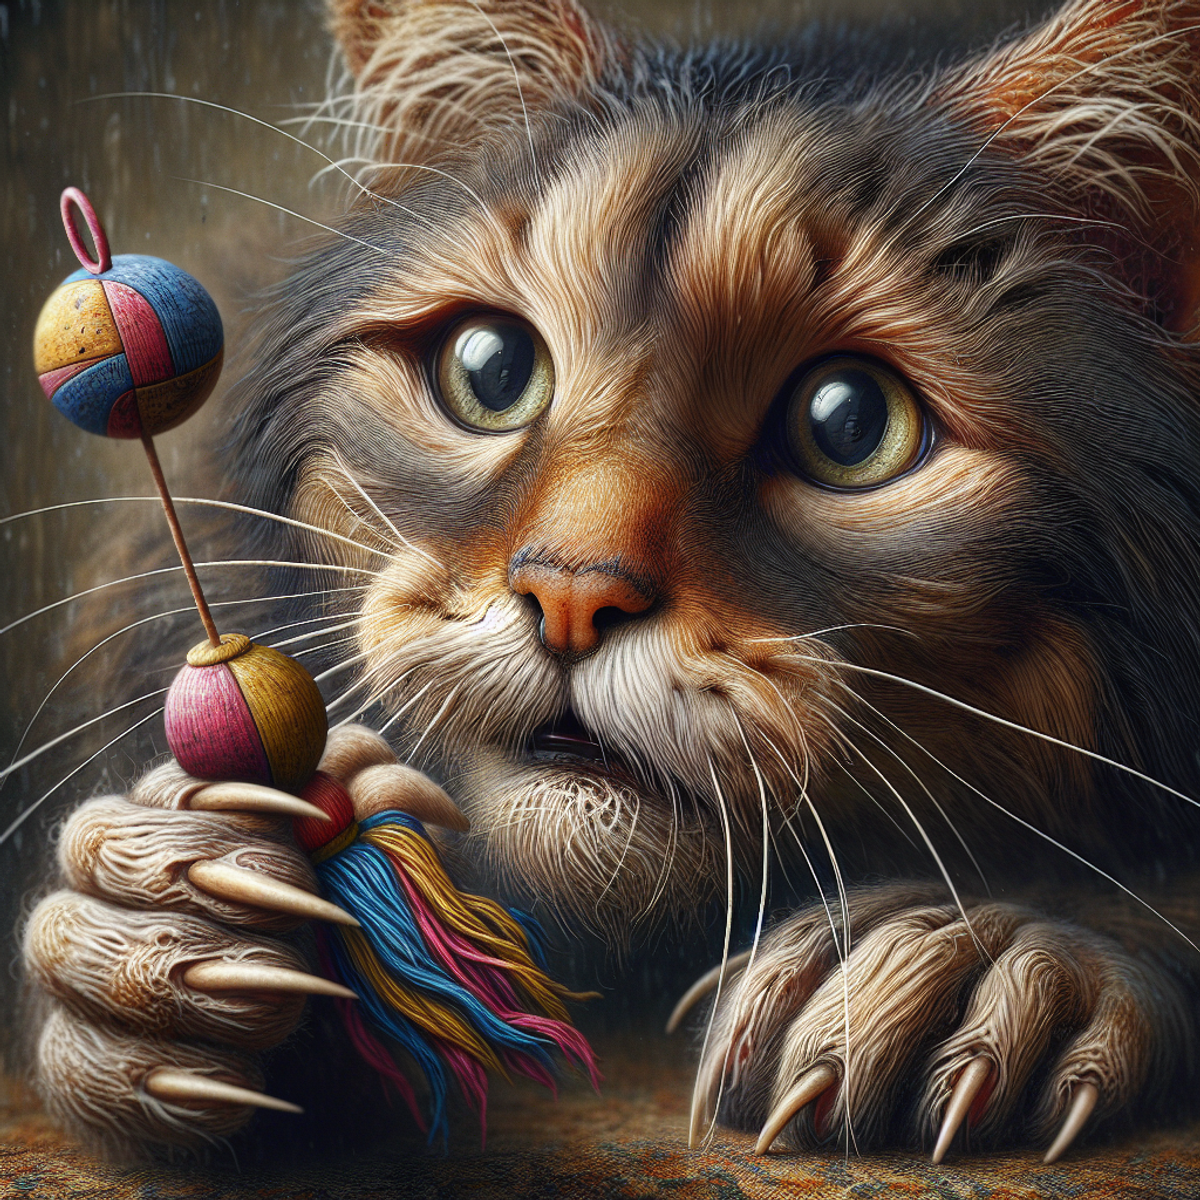 An old cat with wide eyes playing with a colorful toy.